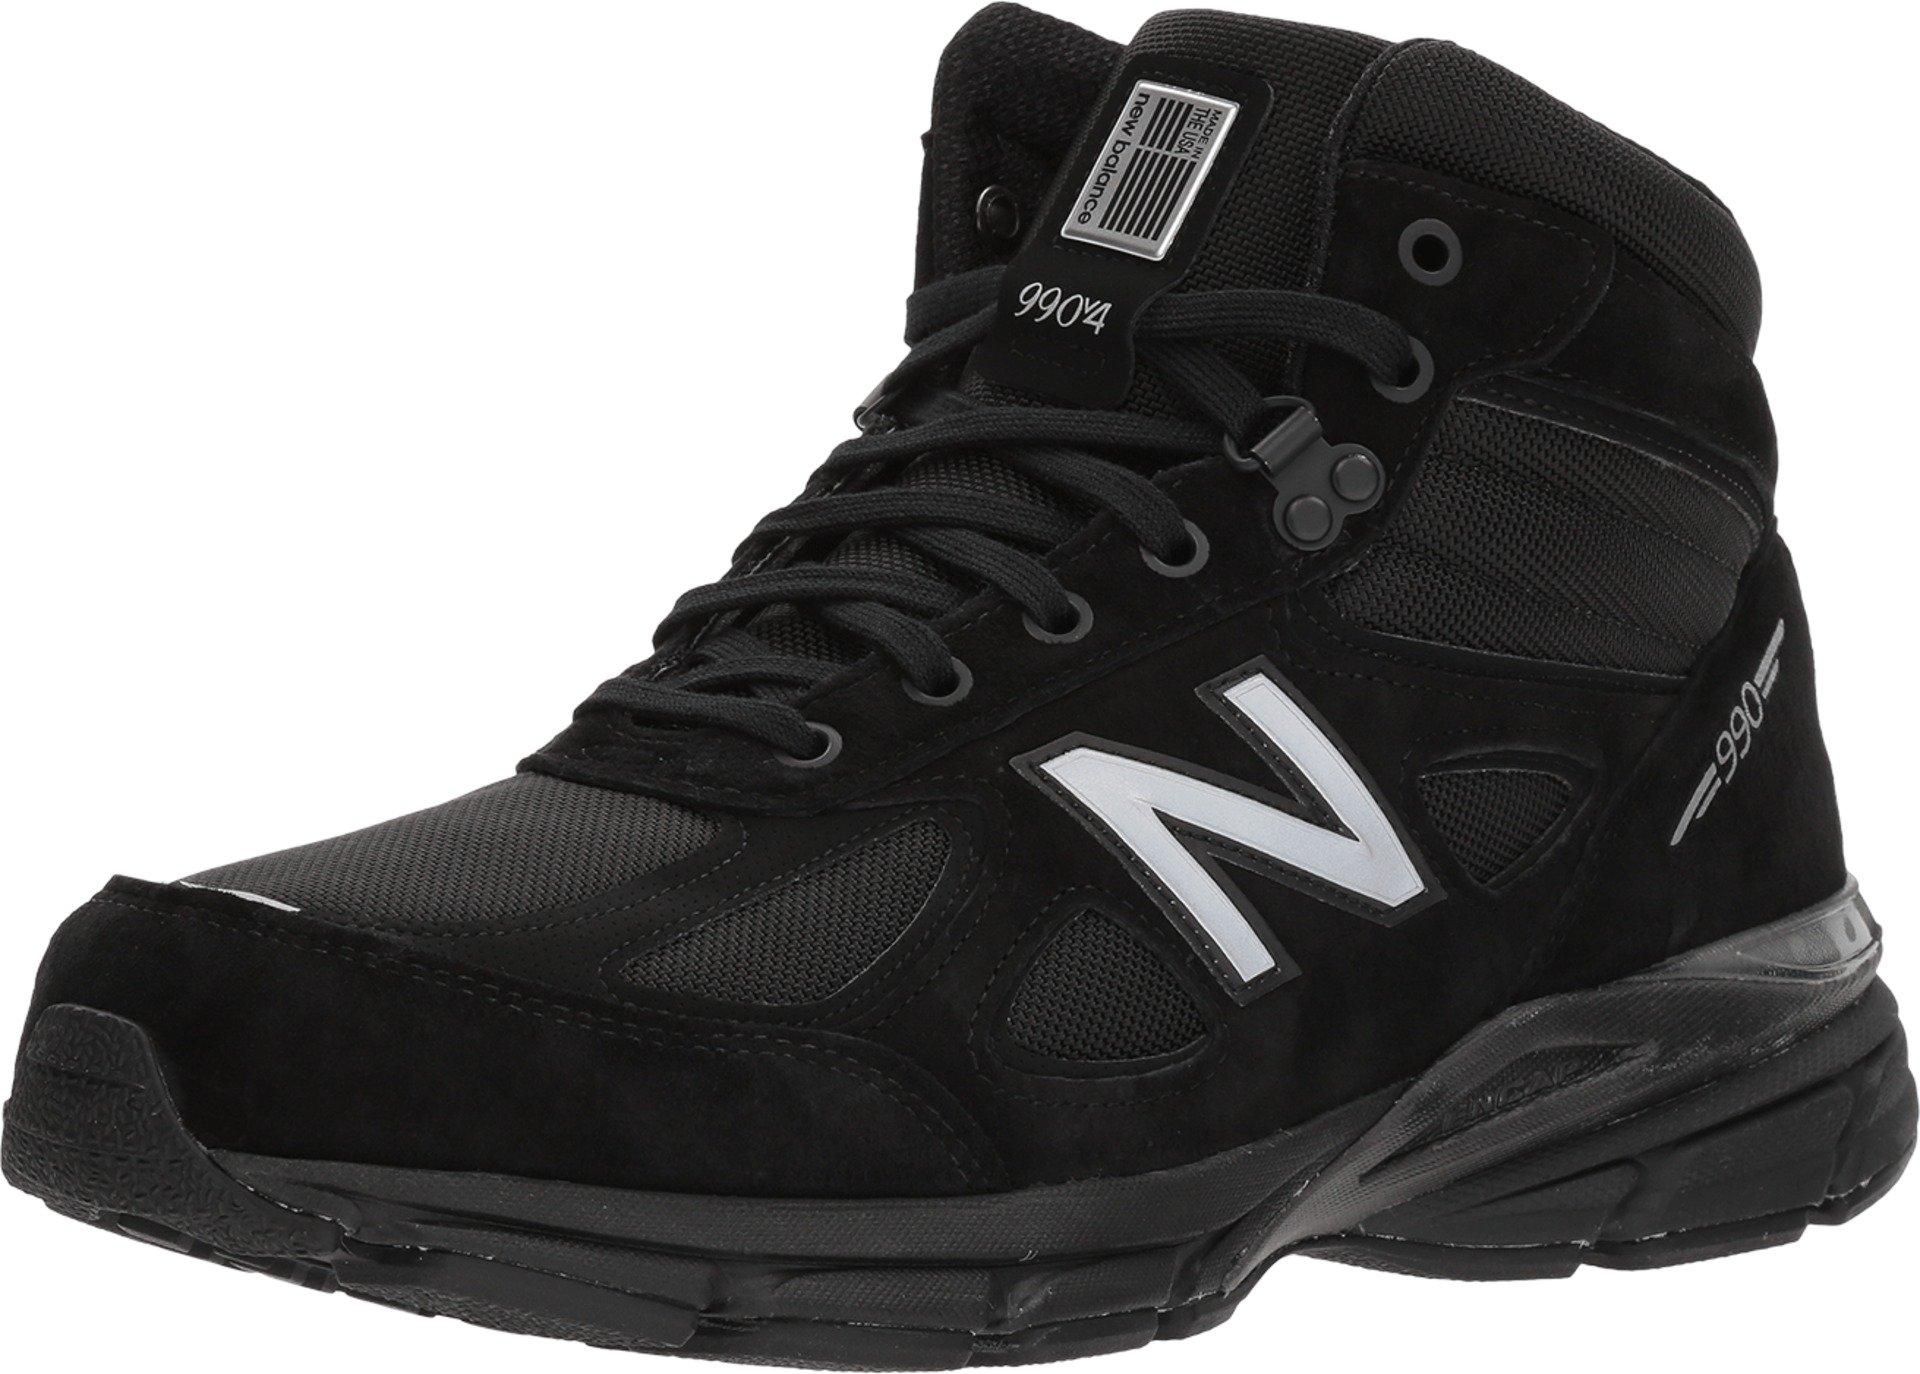 New Balance Rubber 990v4 Boot (black/grey) Pull-on Boots for Men - Lyst